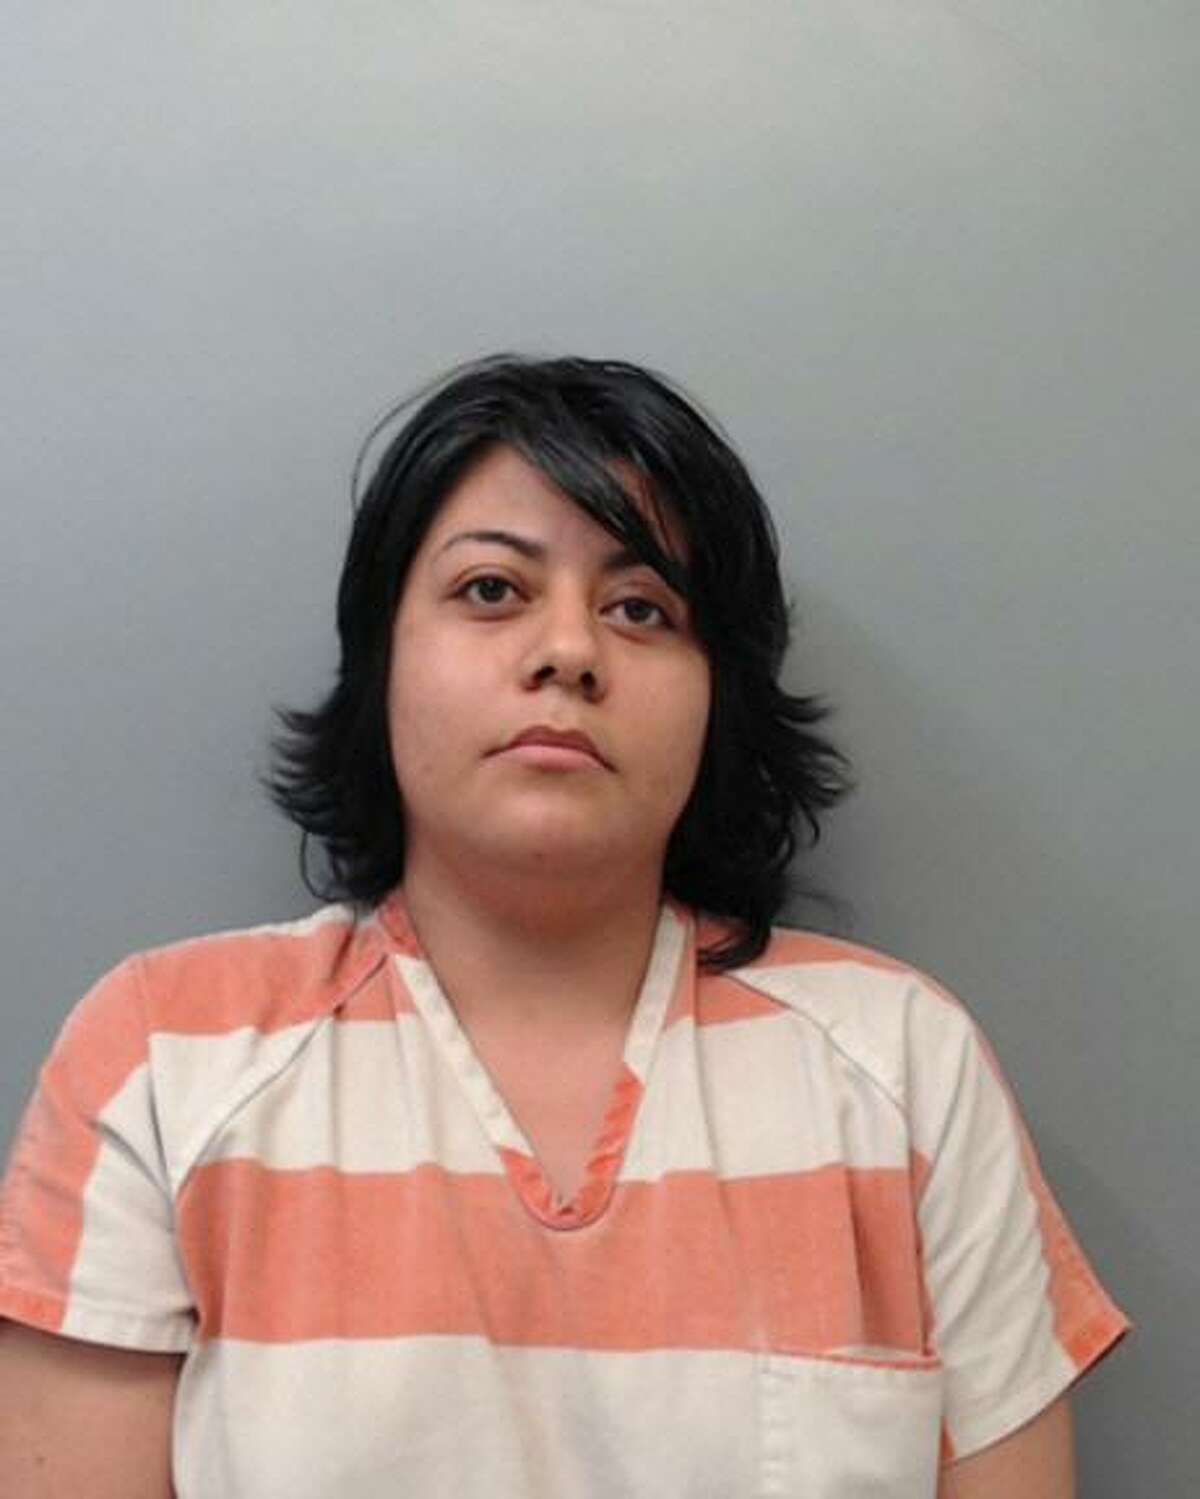 Viridiana Lujan, 30, was charged with abandoning, endangering a child with intent to return.